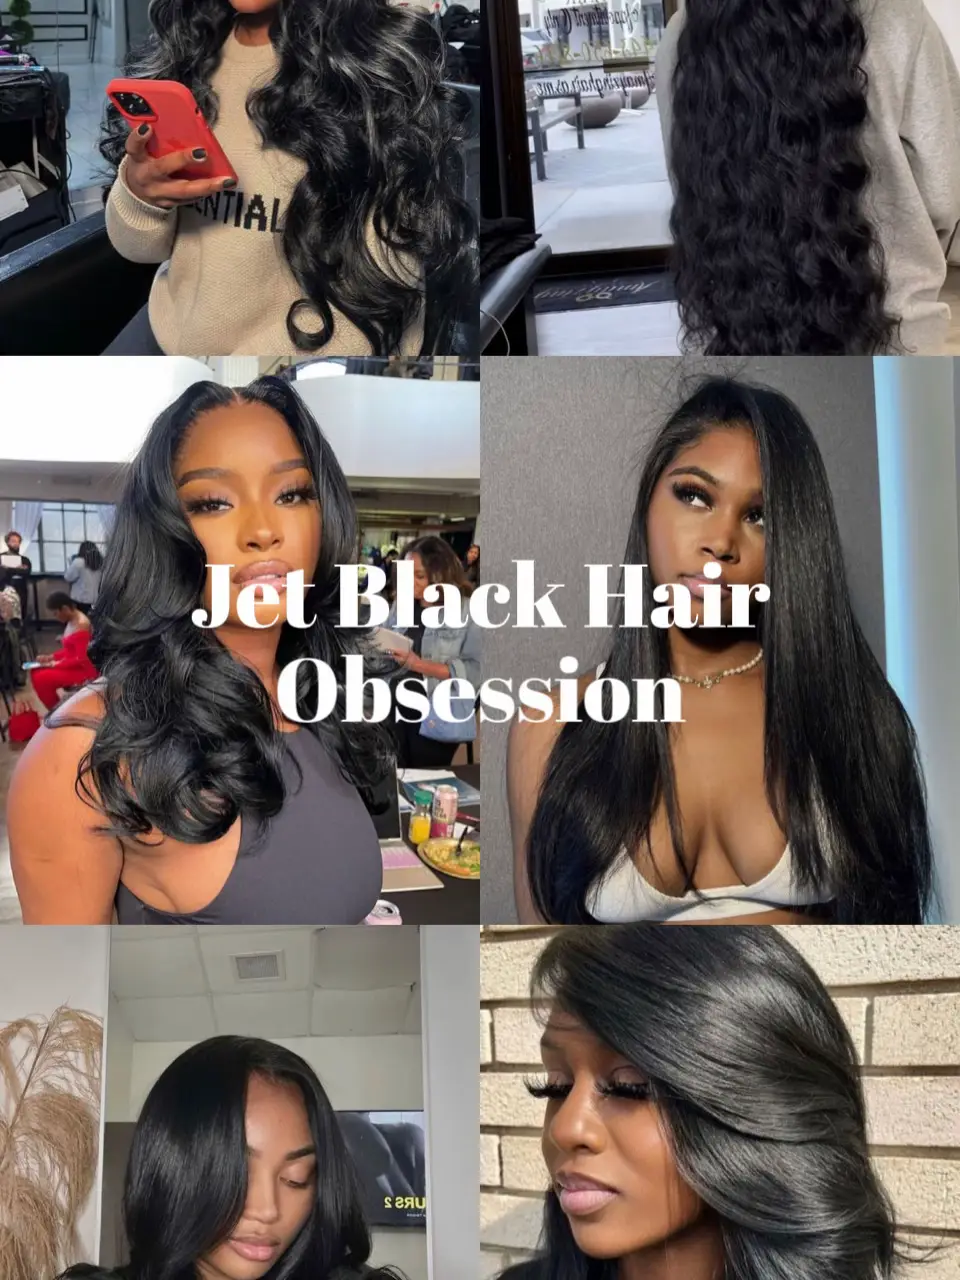 black hair styles with weave - Lemon8 Search